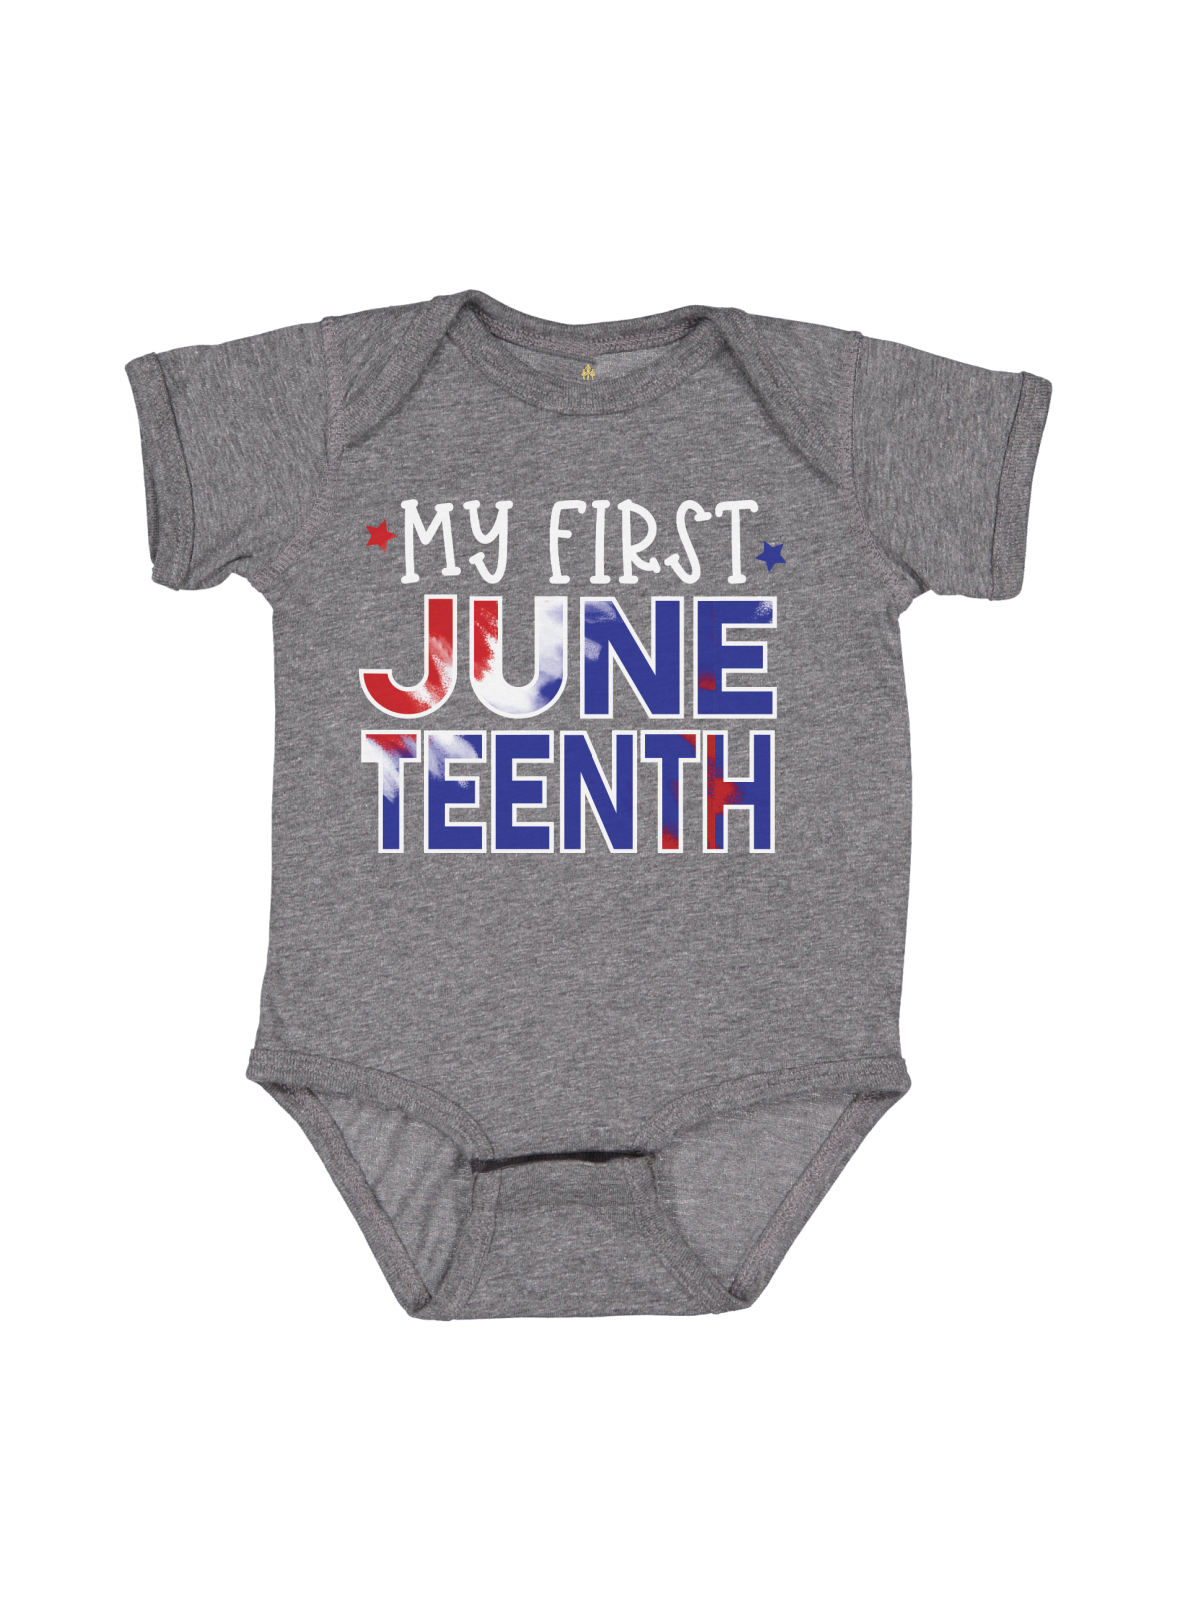 My First Juneteenth Infant Bodysuit in Gray